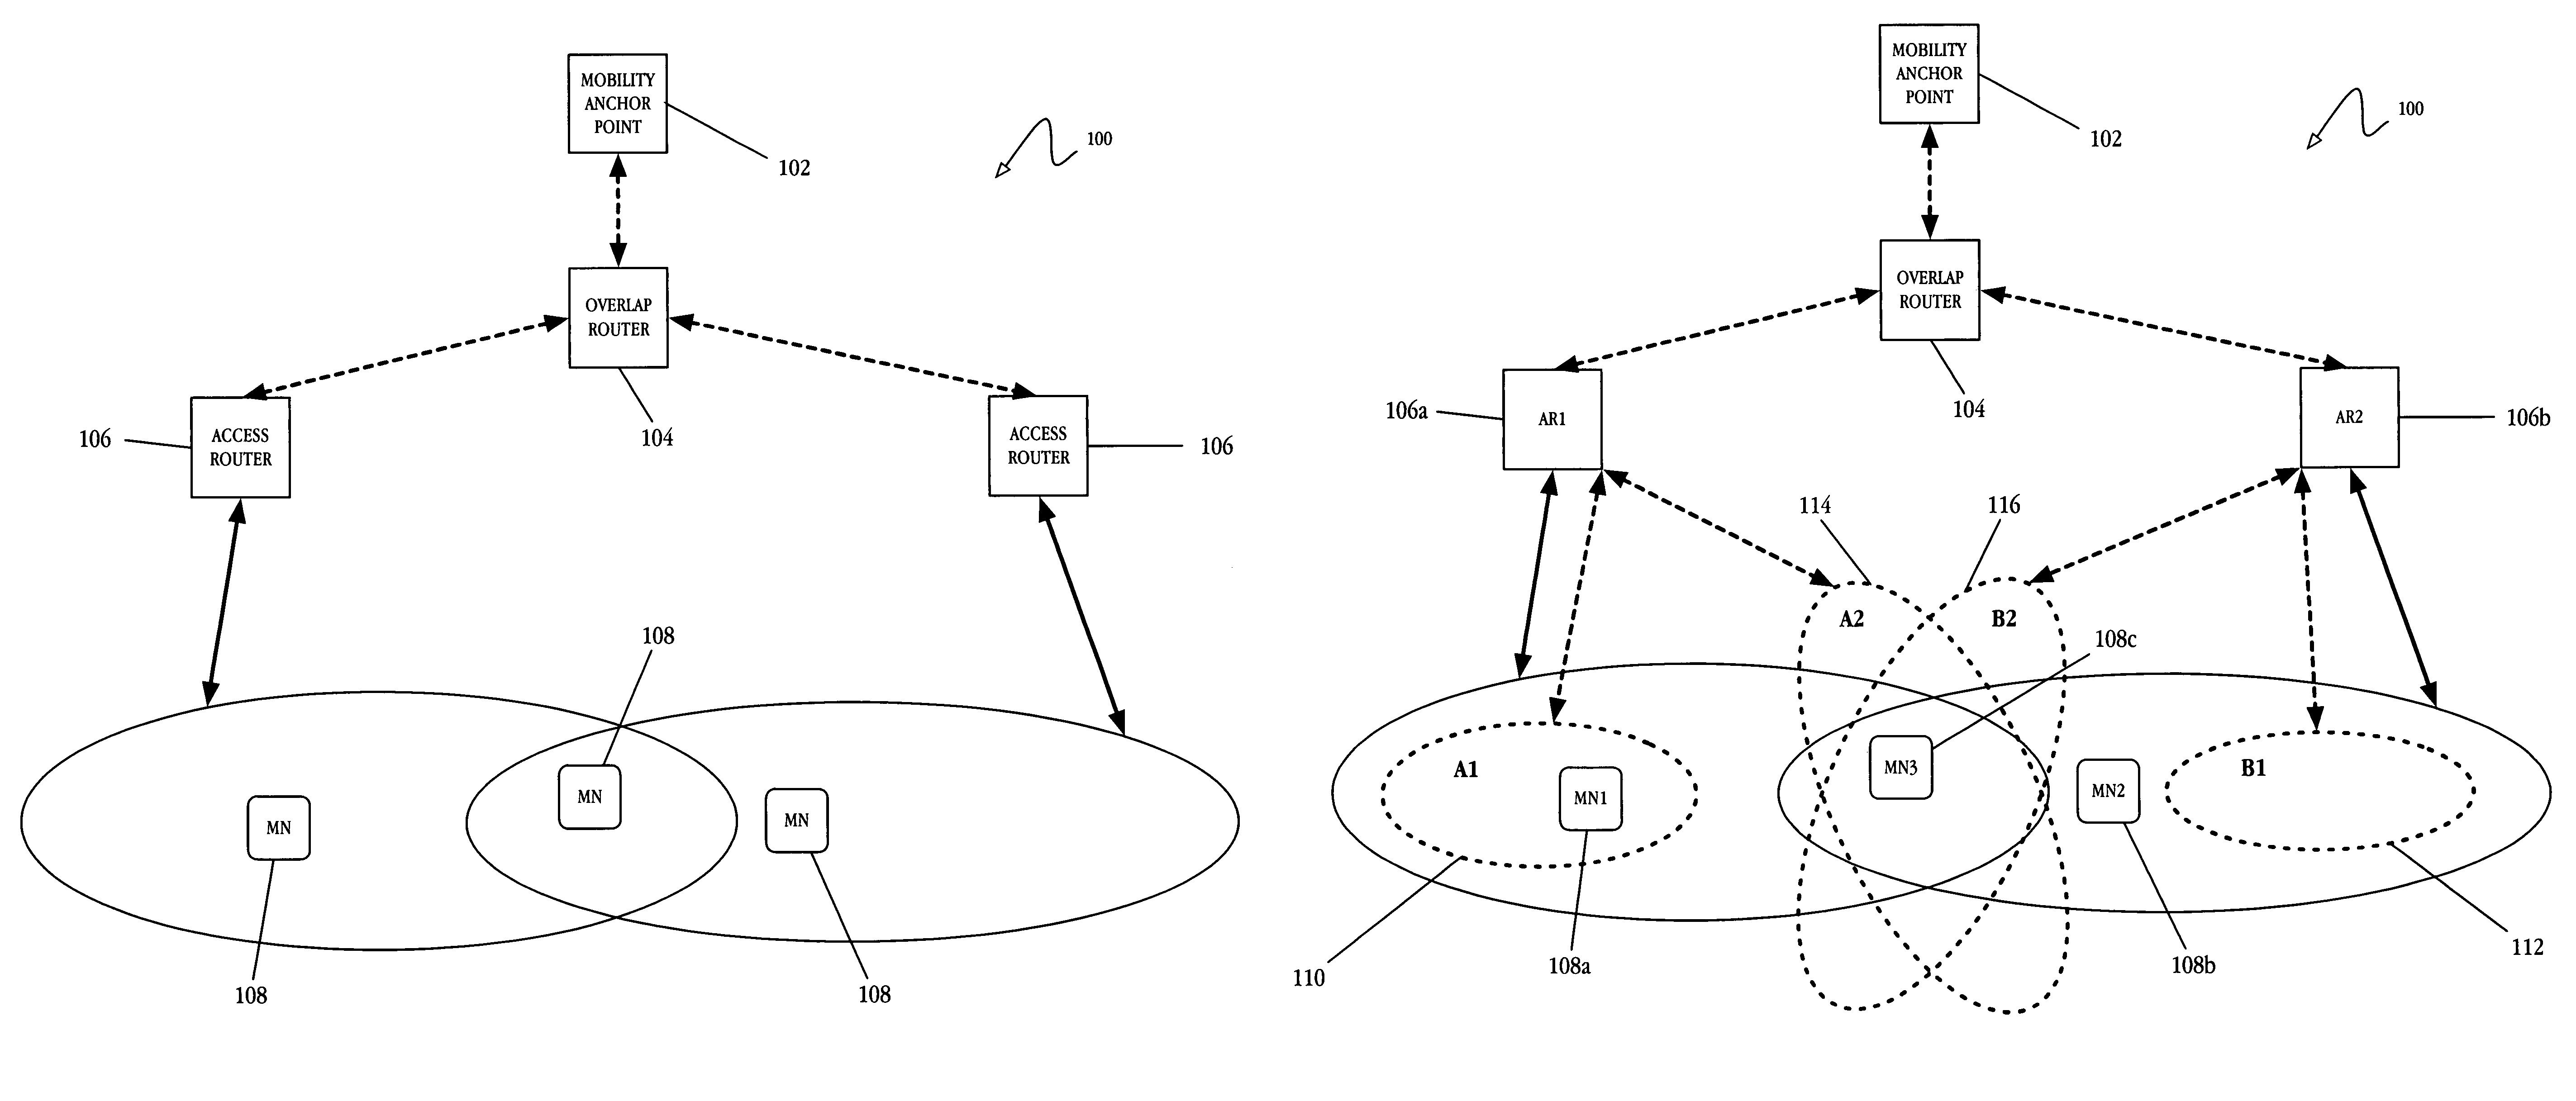 Systems and methods for increased mobility among mobile nodes in a wireless network